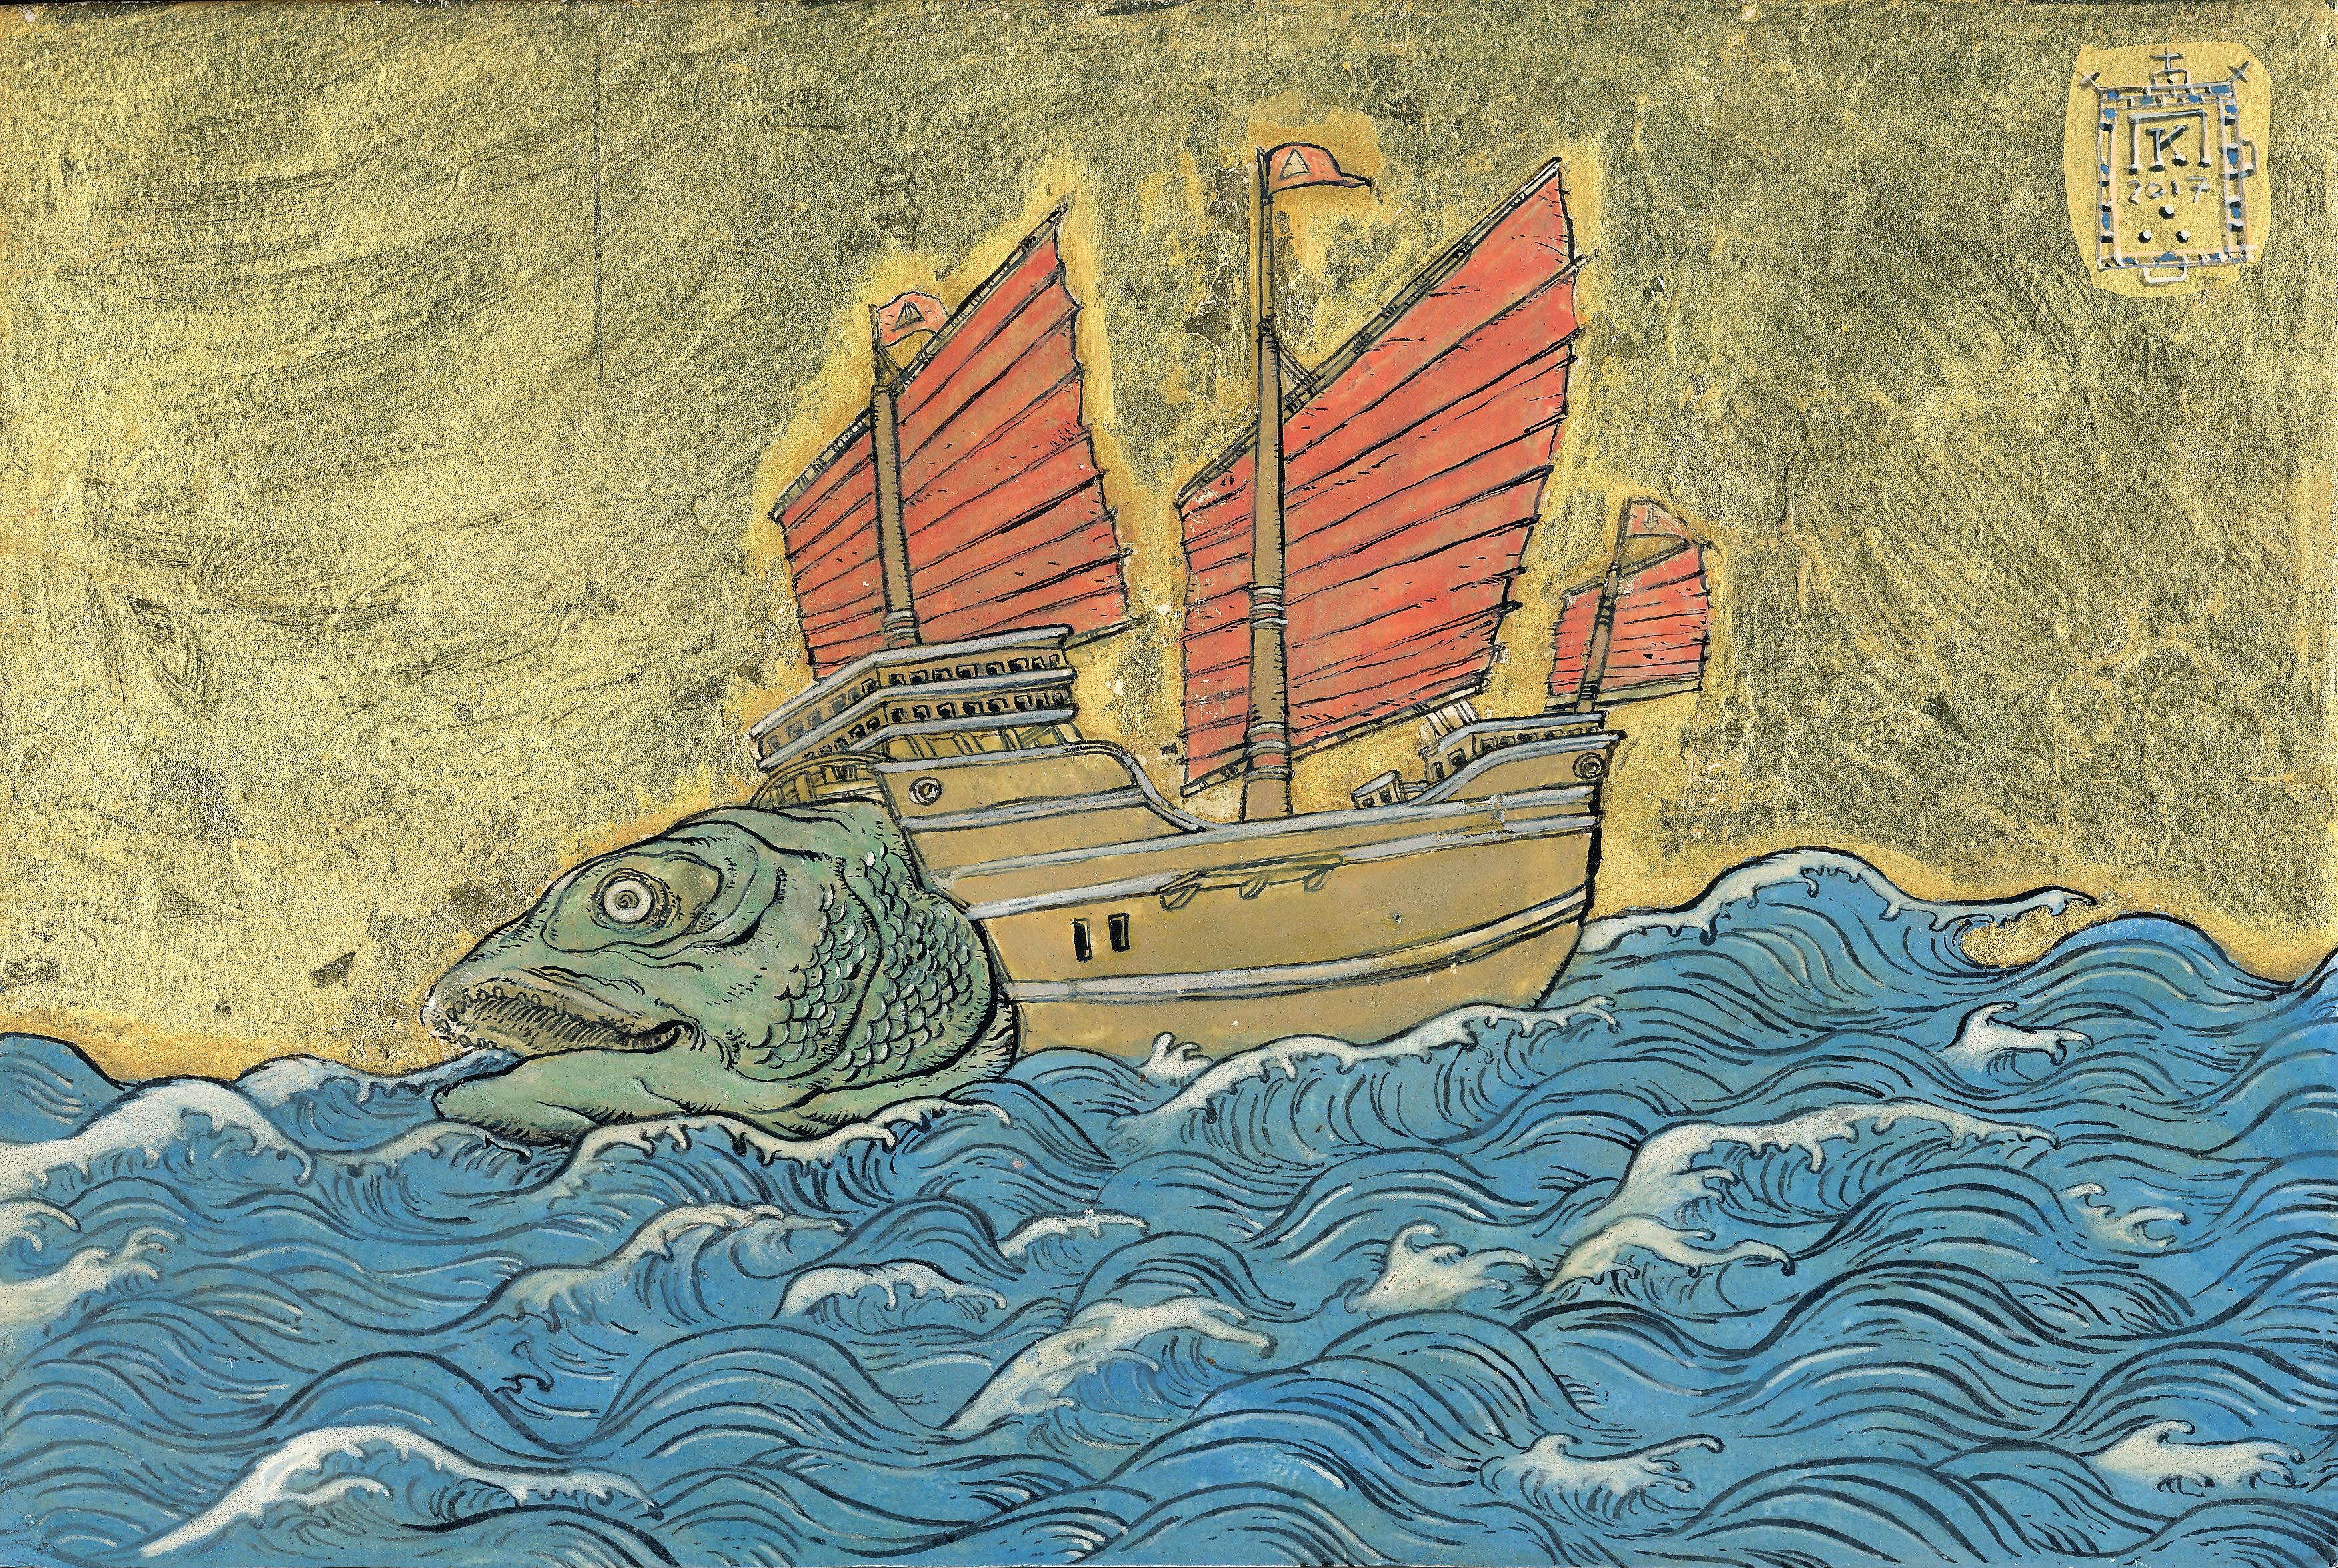 Study for a Boatfish with Red Sails - Ink, egg-tempera and gold leaf on panel